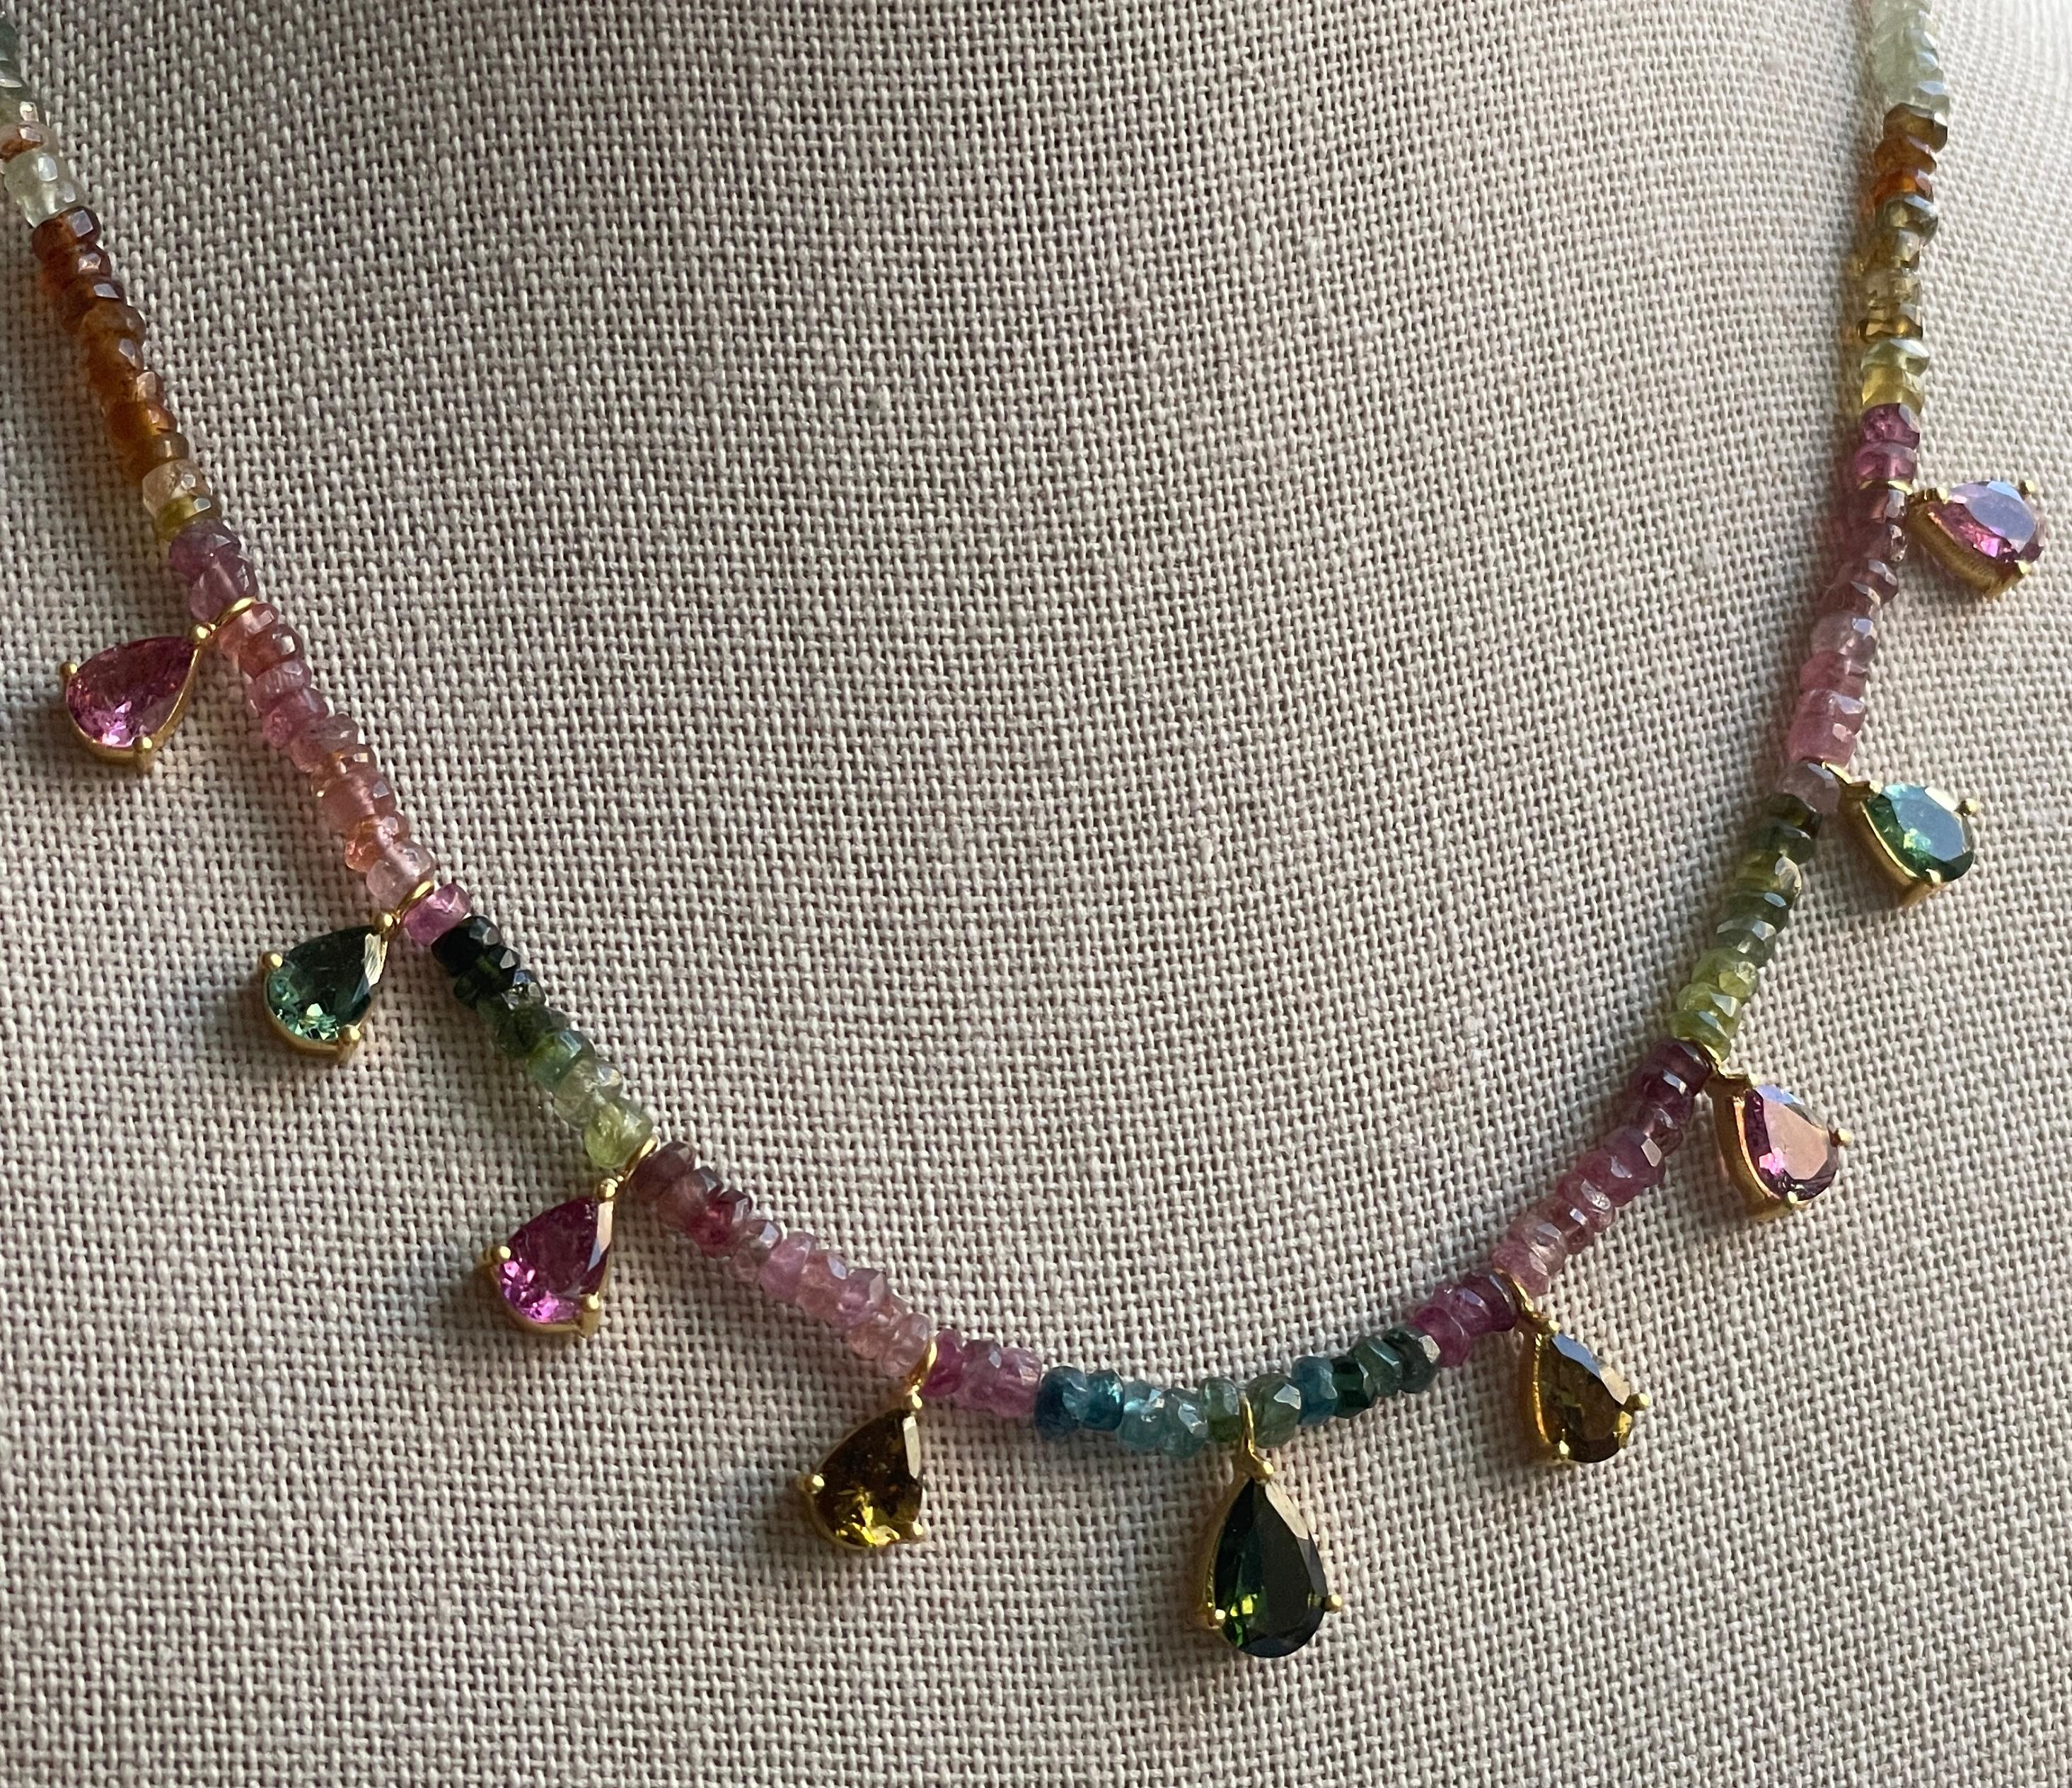 This necklace is comprised of 9 Tourmaline Pears in all colors including pink, sage green, amber and hunter green. Tourmaline is a magical stones that comes in many different hues. The beaded on this necklace range from sage green, hunter green,